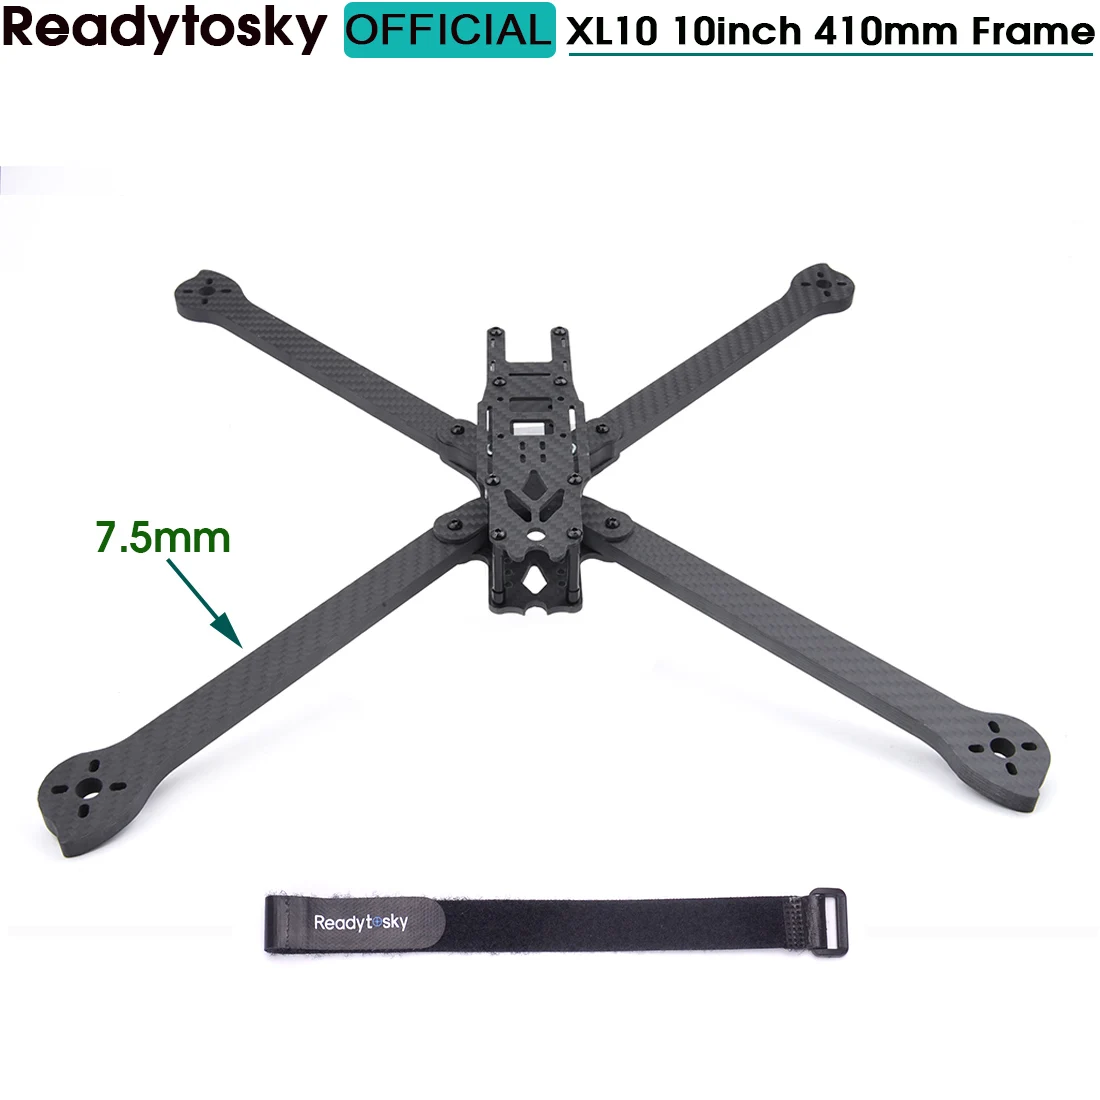 

XL10 10inch 410mm Wheelbase with 7.5mm Thickness Arm TrueX Carbon Frame Kit for Super Long Range FPV Freestyle Frame Quadcopter